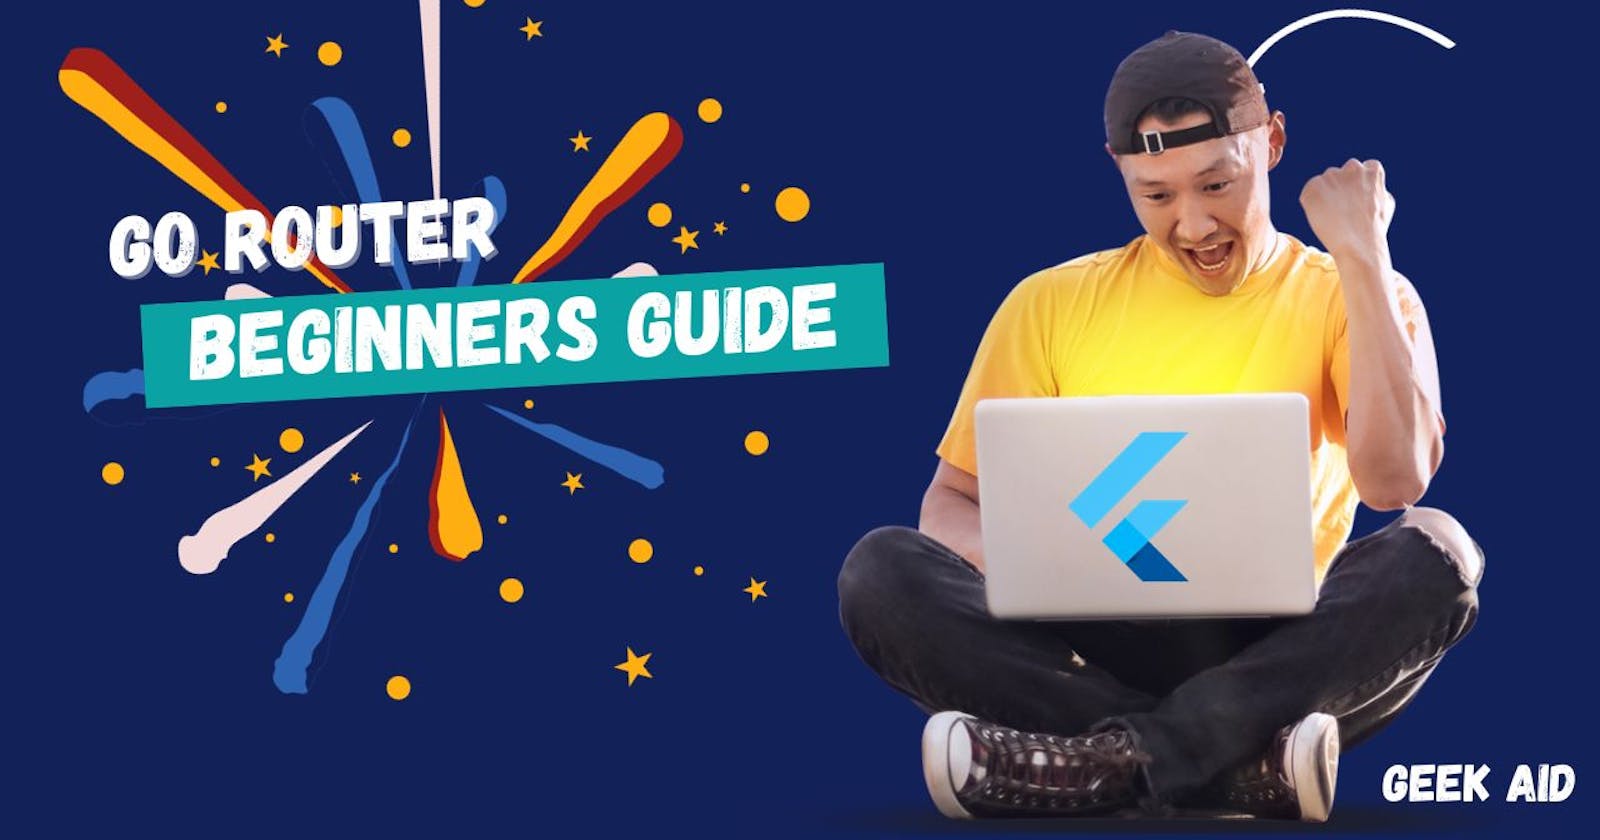 Go Router: Beginners Guide